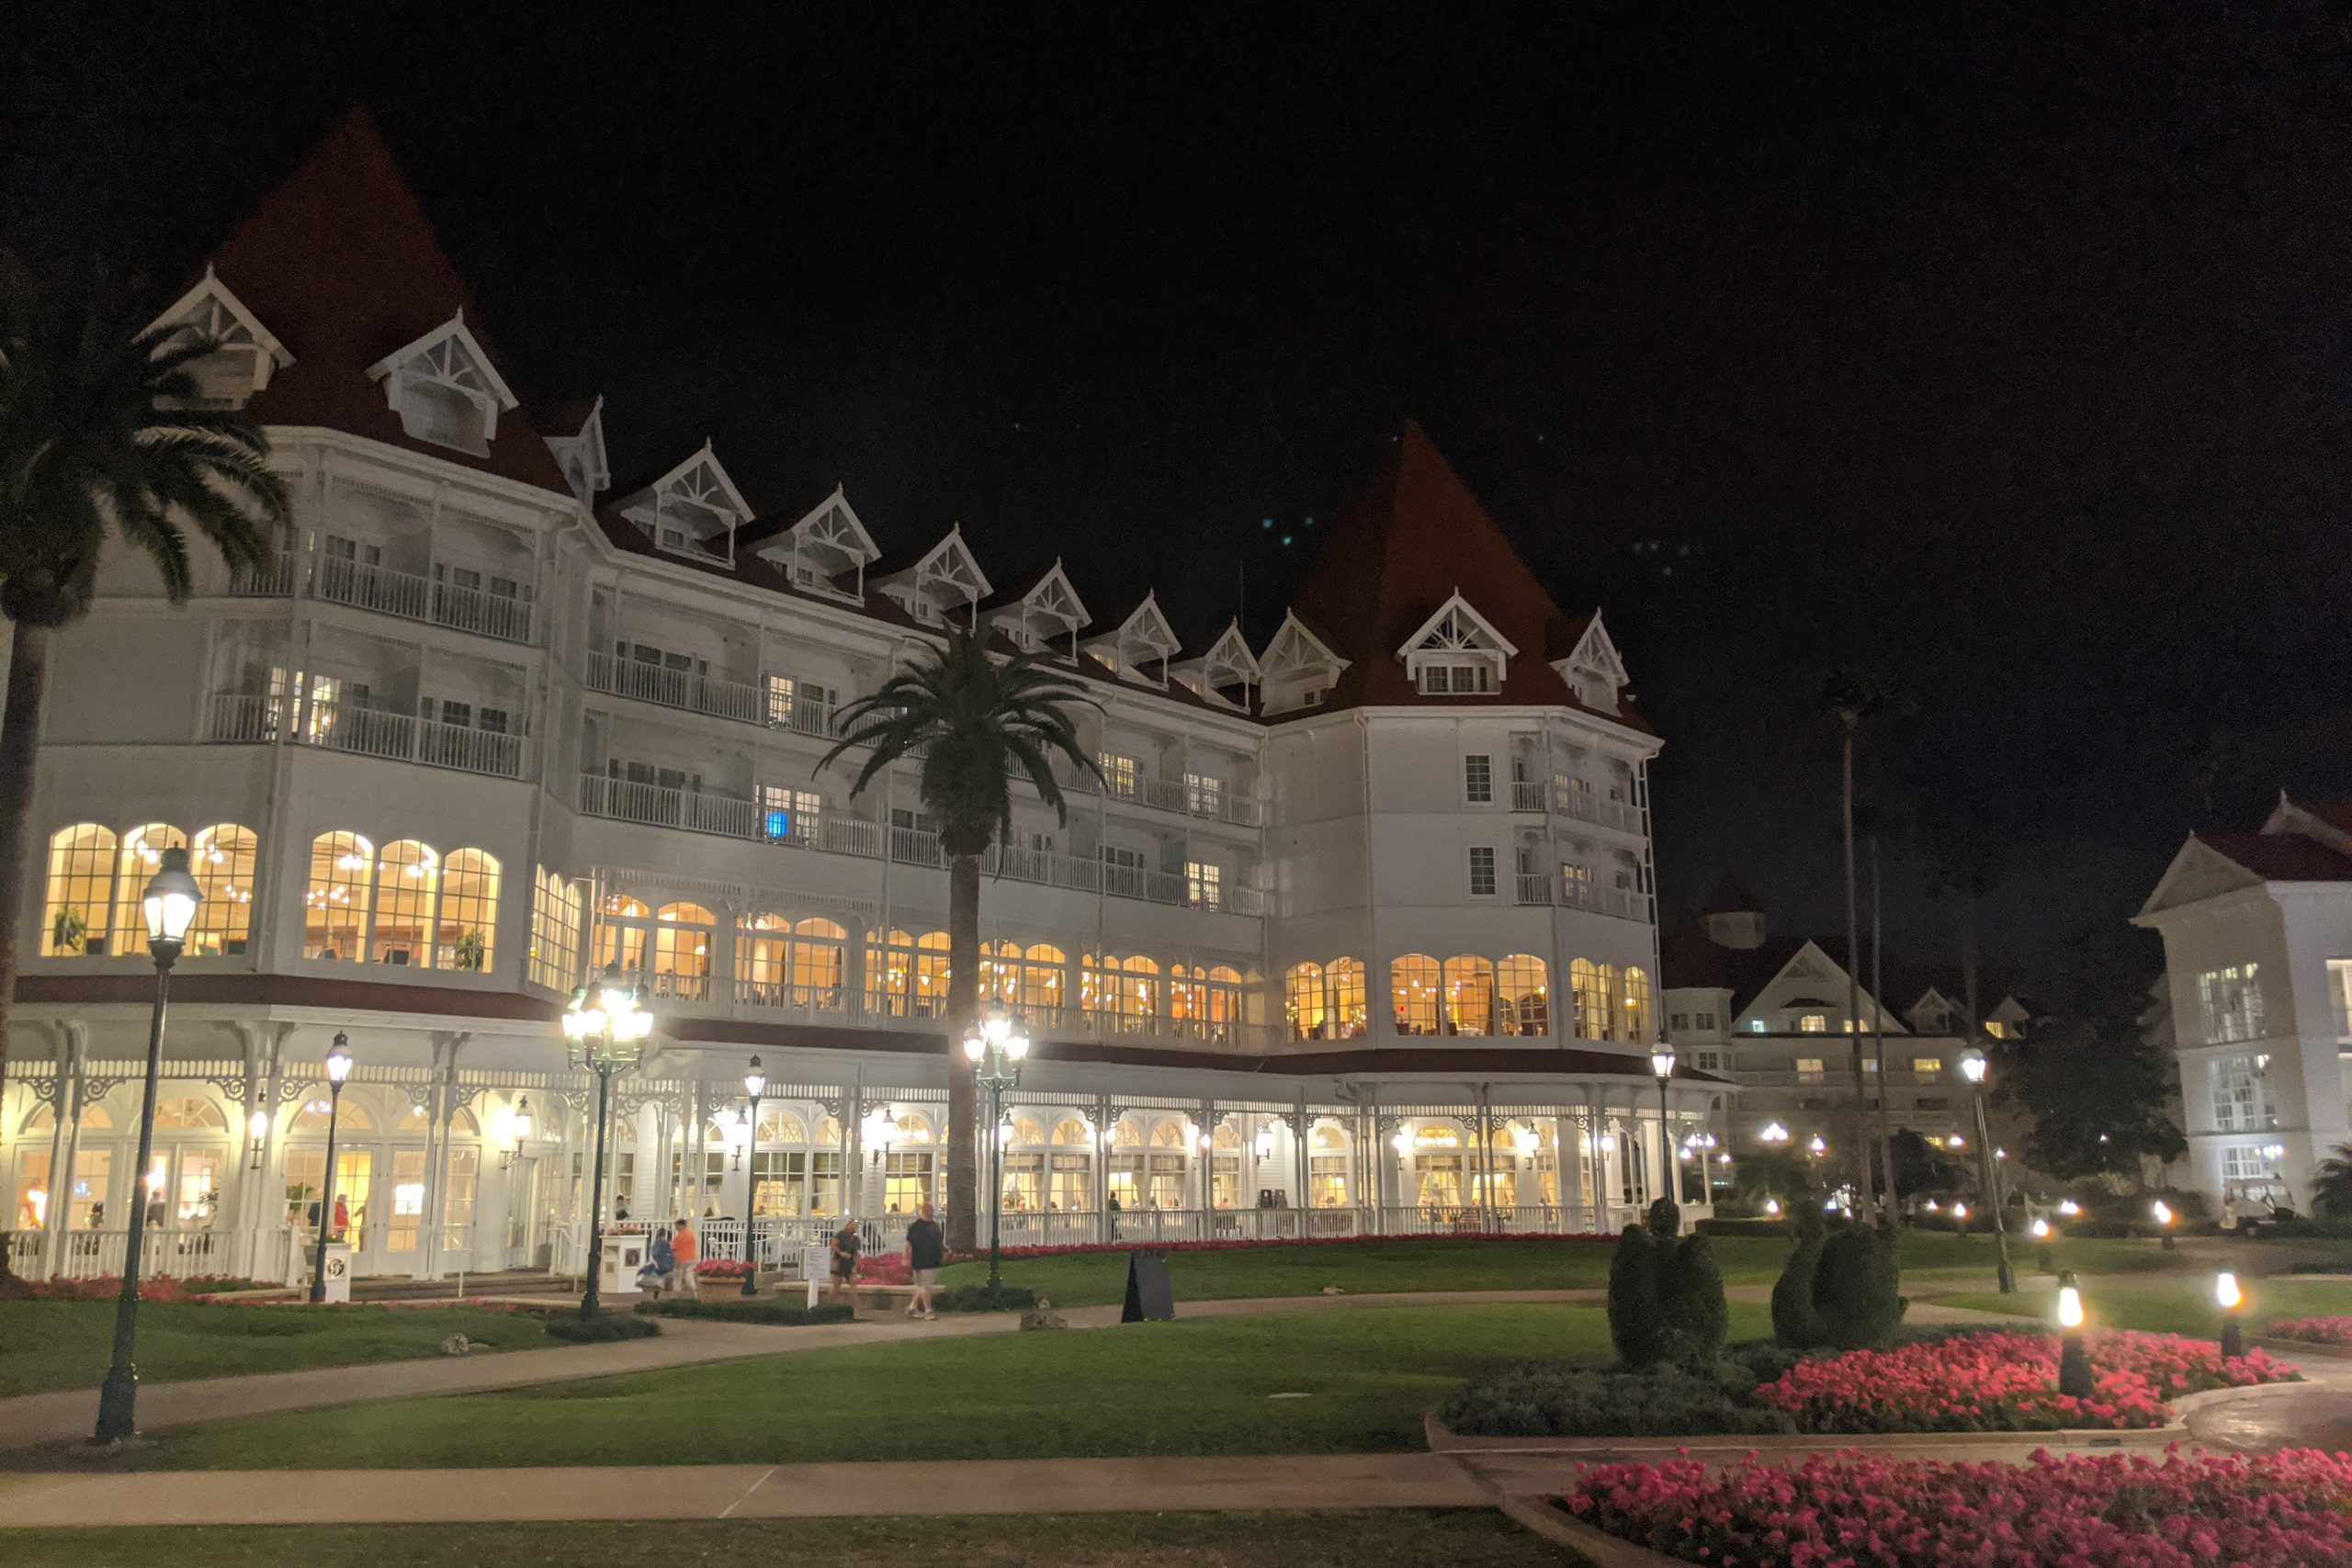 Grand Floridian Resort & Spa, lit up at night time